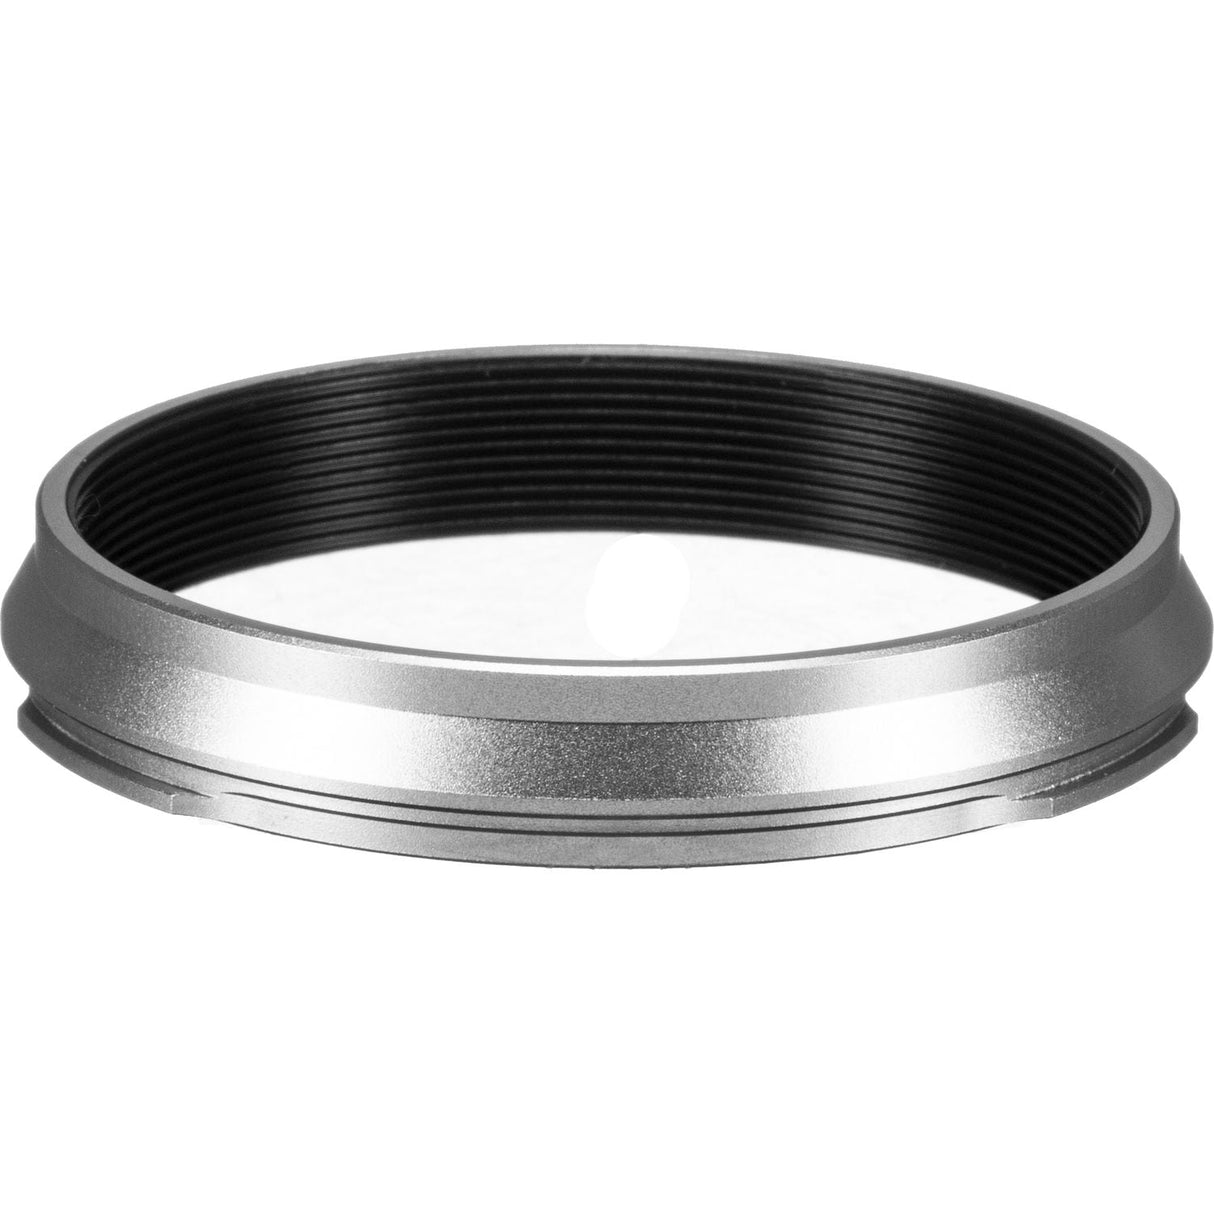 FUJIFILM LH-100 Lens Hood and Adapter Ring for X100/X100S (Silver)